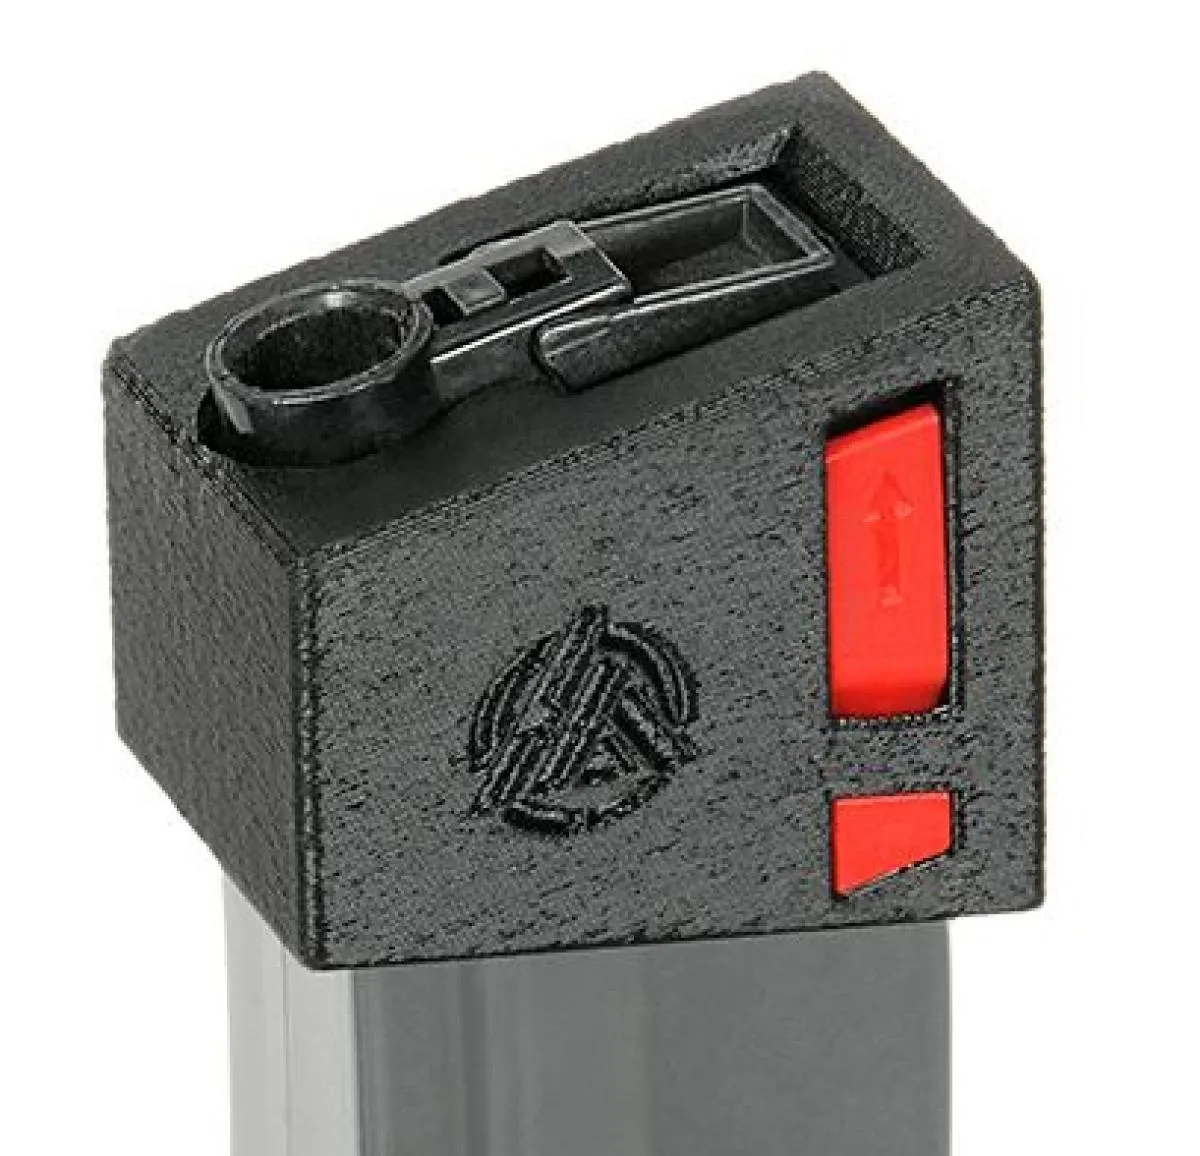 Hades Magazin Adapter suitable for MP5/UTR